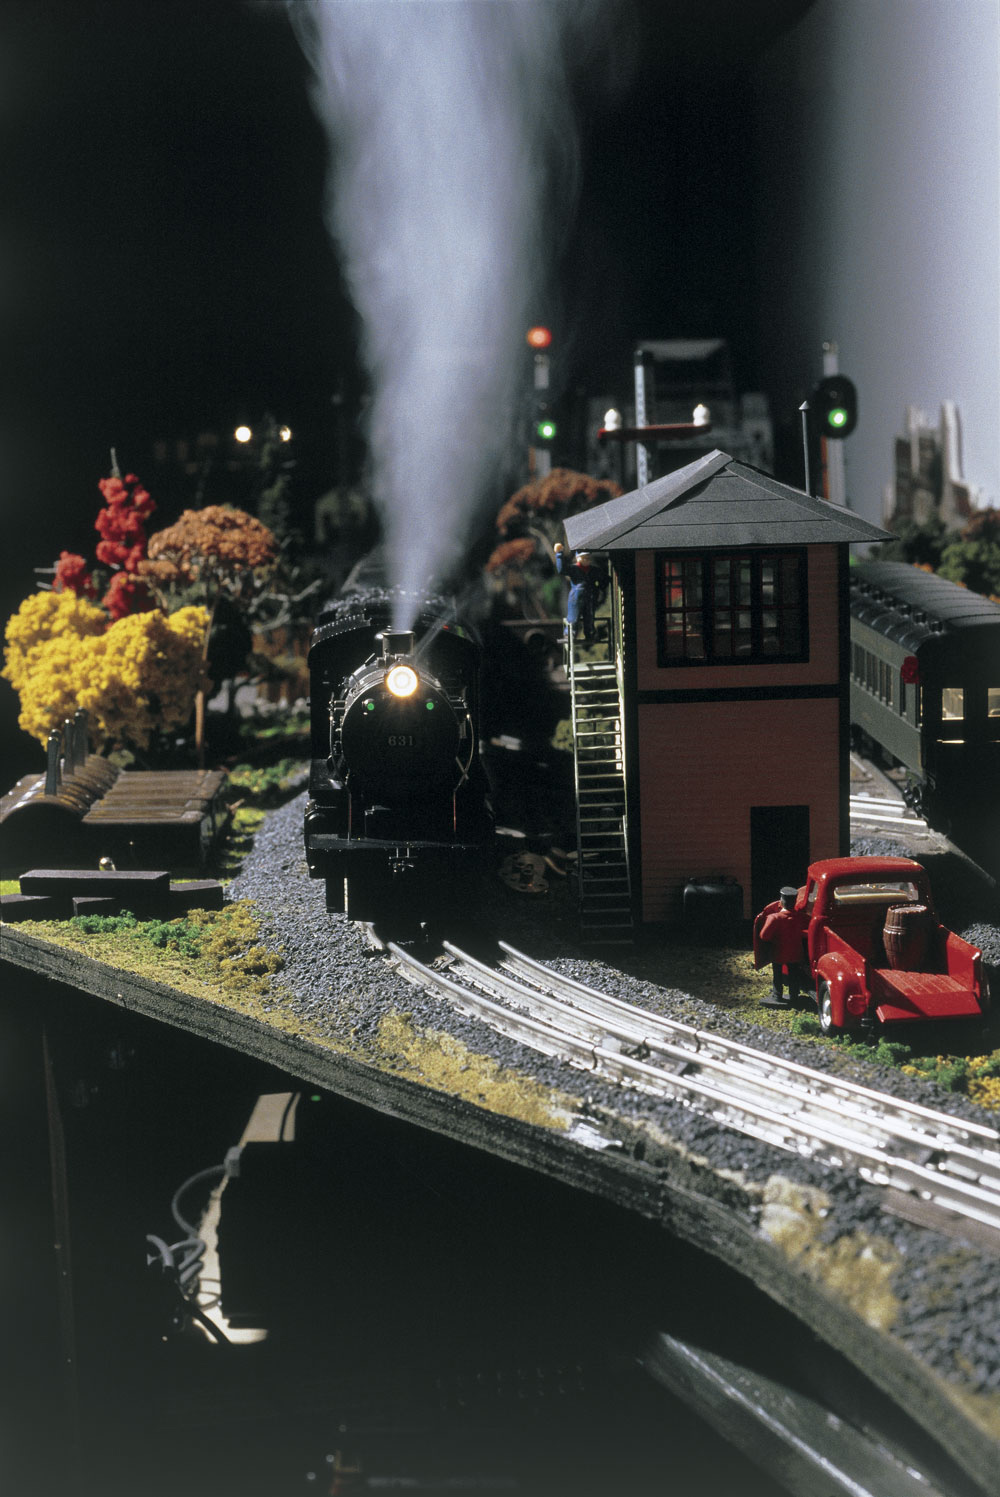 Front of an O gauge model steam locomotive on layout in night operation with smoke coming out of the stack next to interlocking tower.